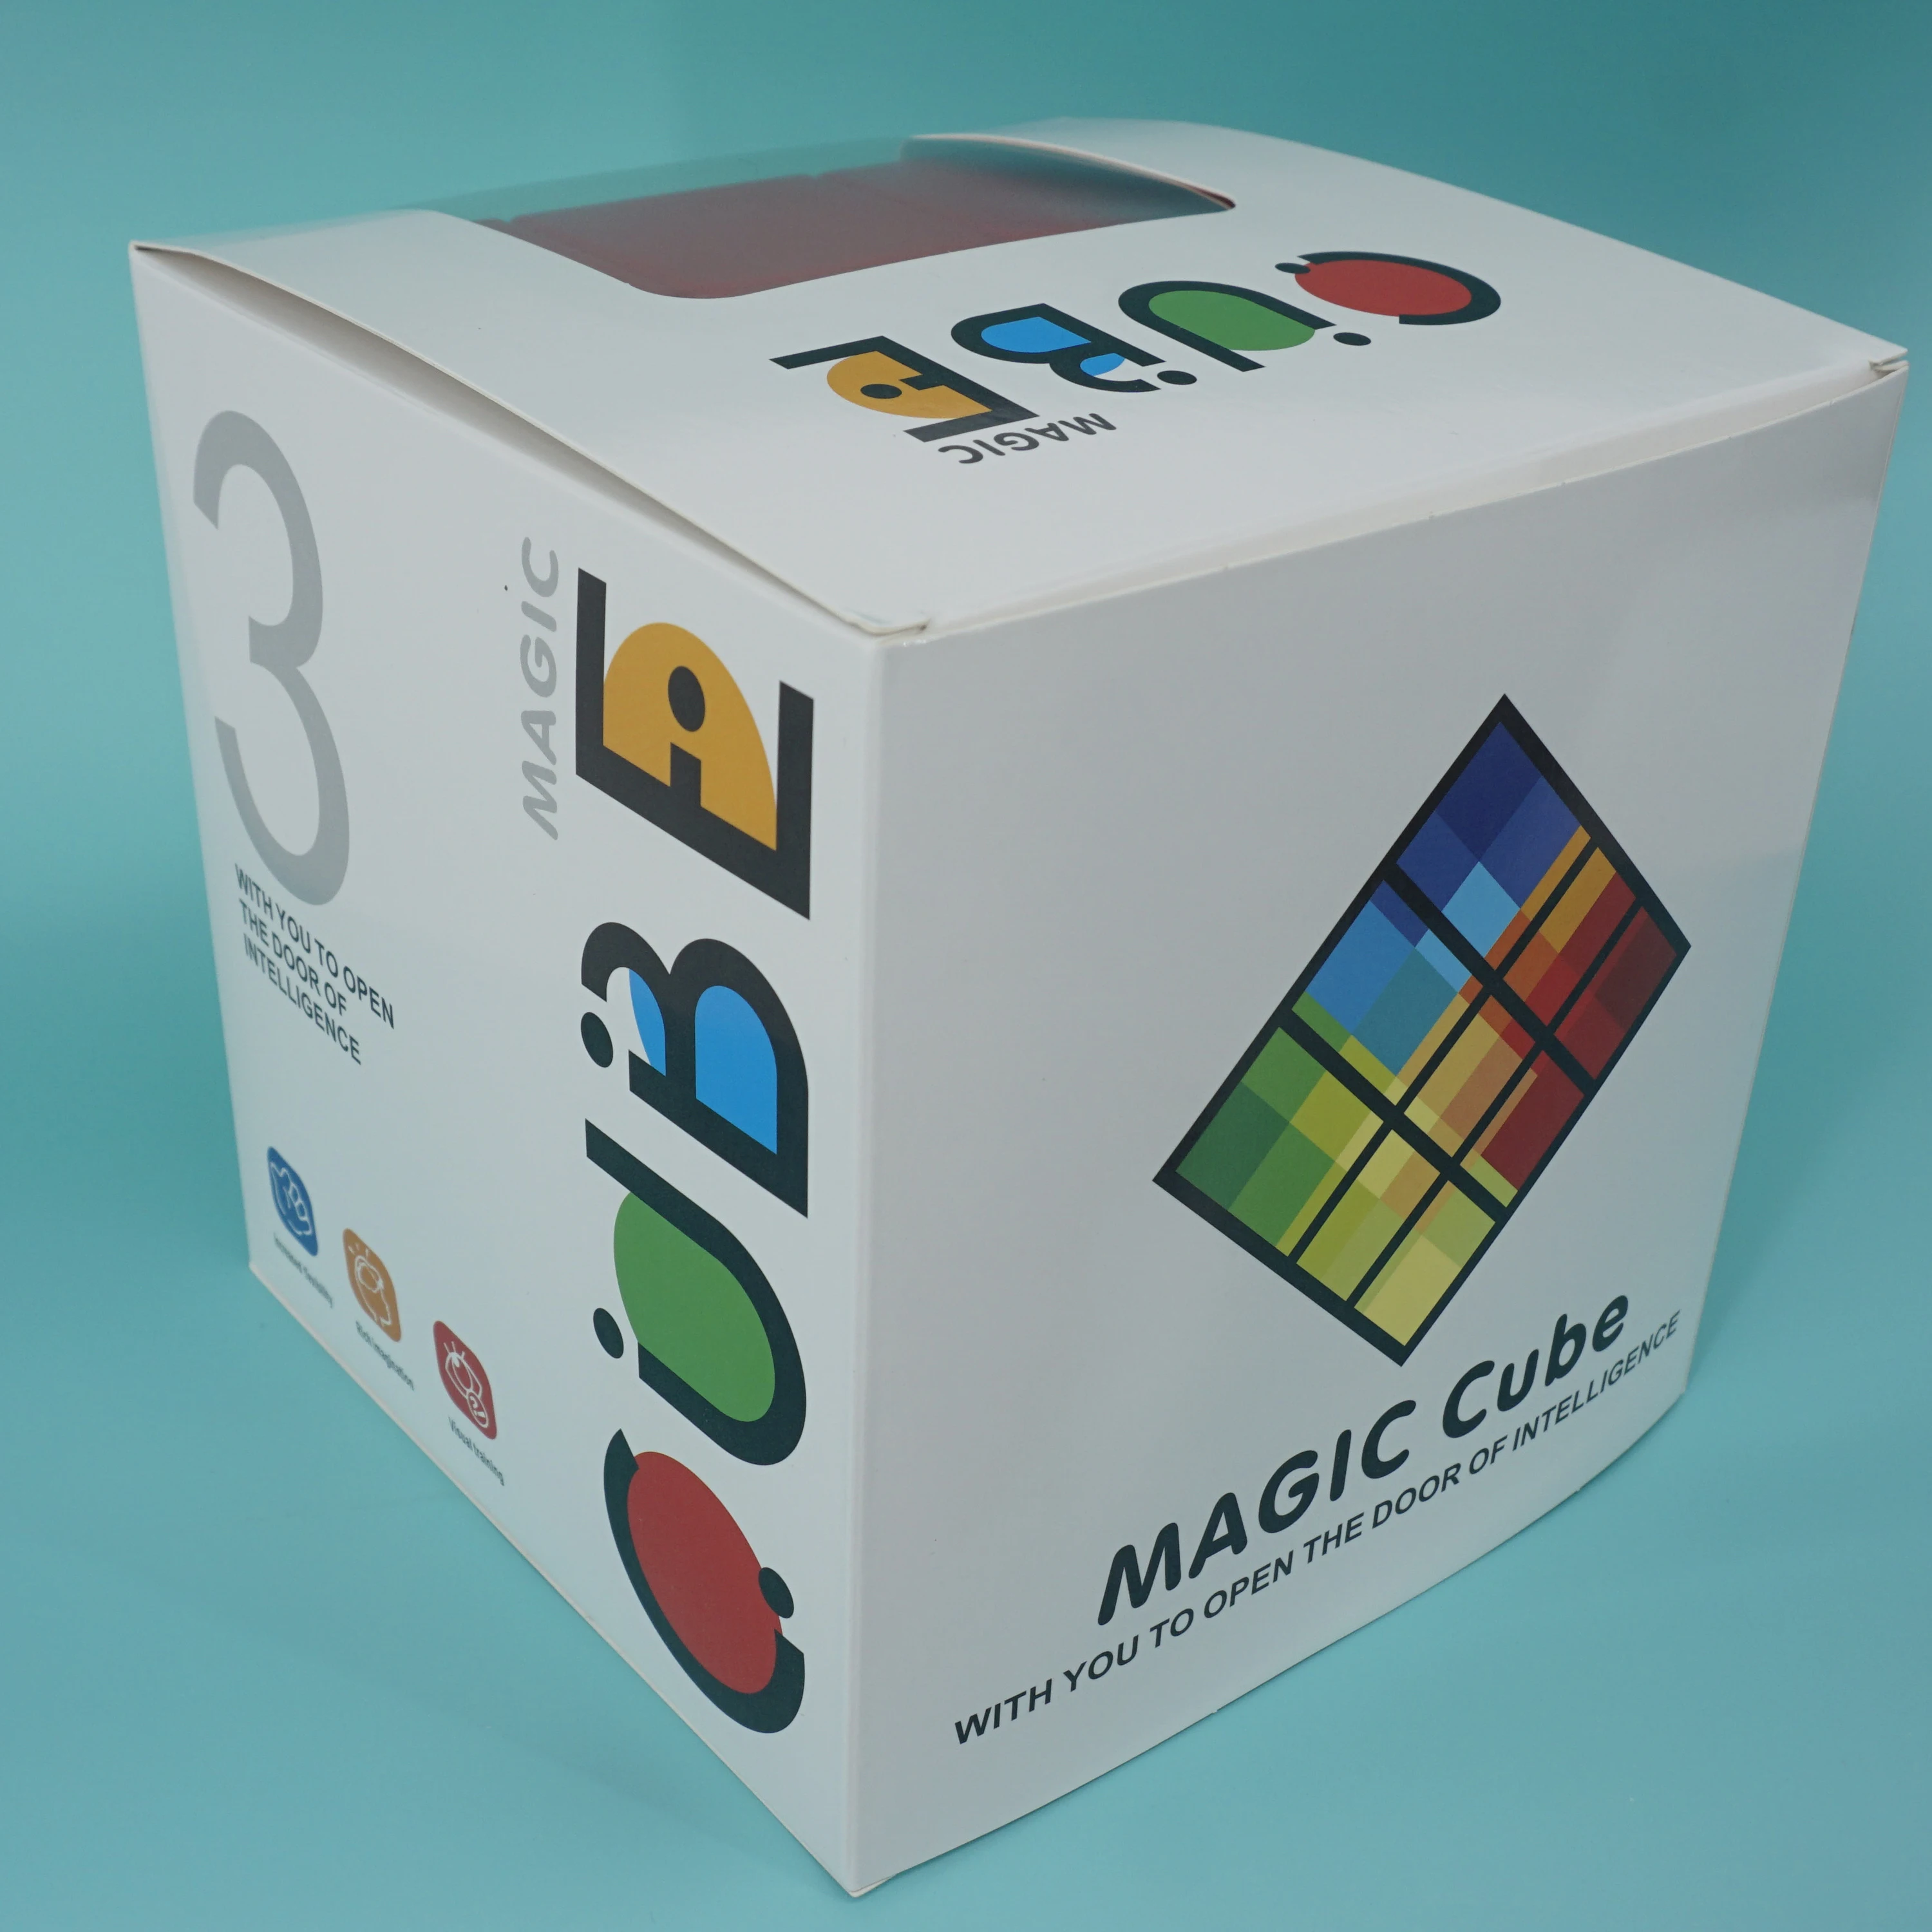  ZY-Wisdom Super Cube 3x3x3 Big Cube Stickerless Speed Cube 18cm  Large Cube Puzzle Magic Cube Toy : Toys & Games